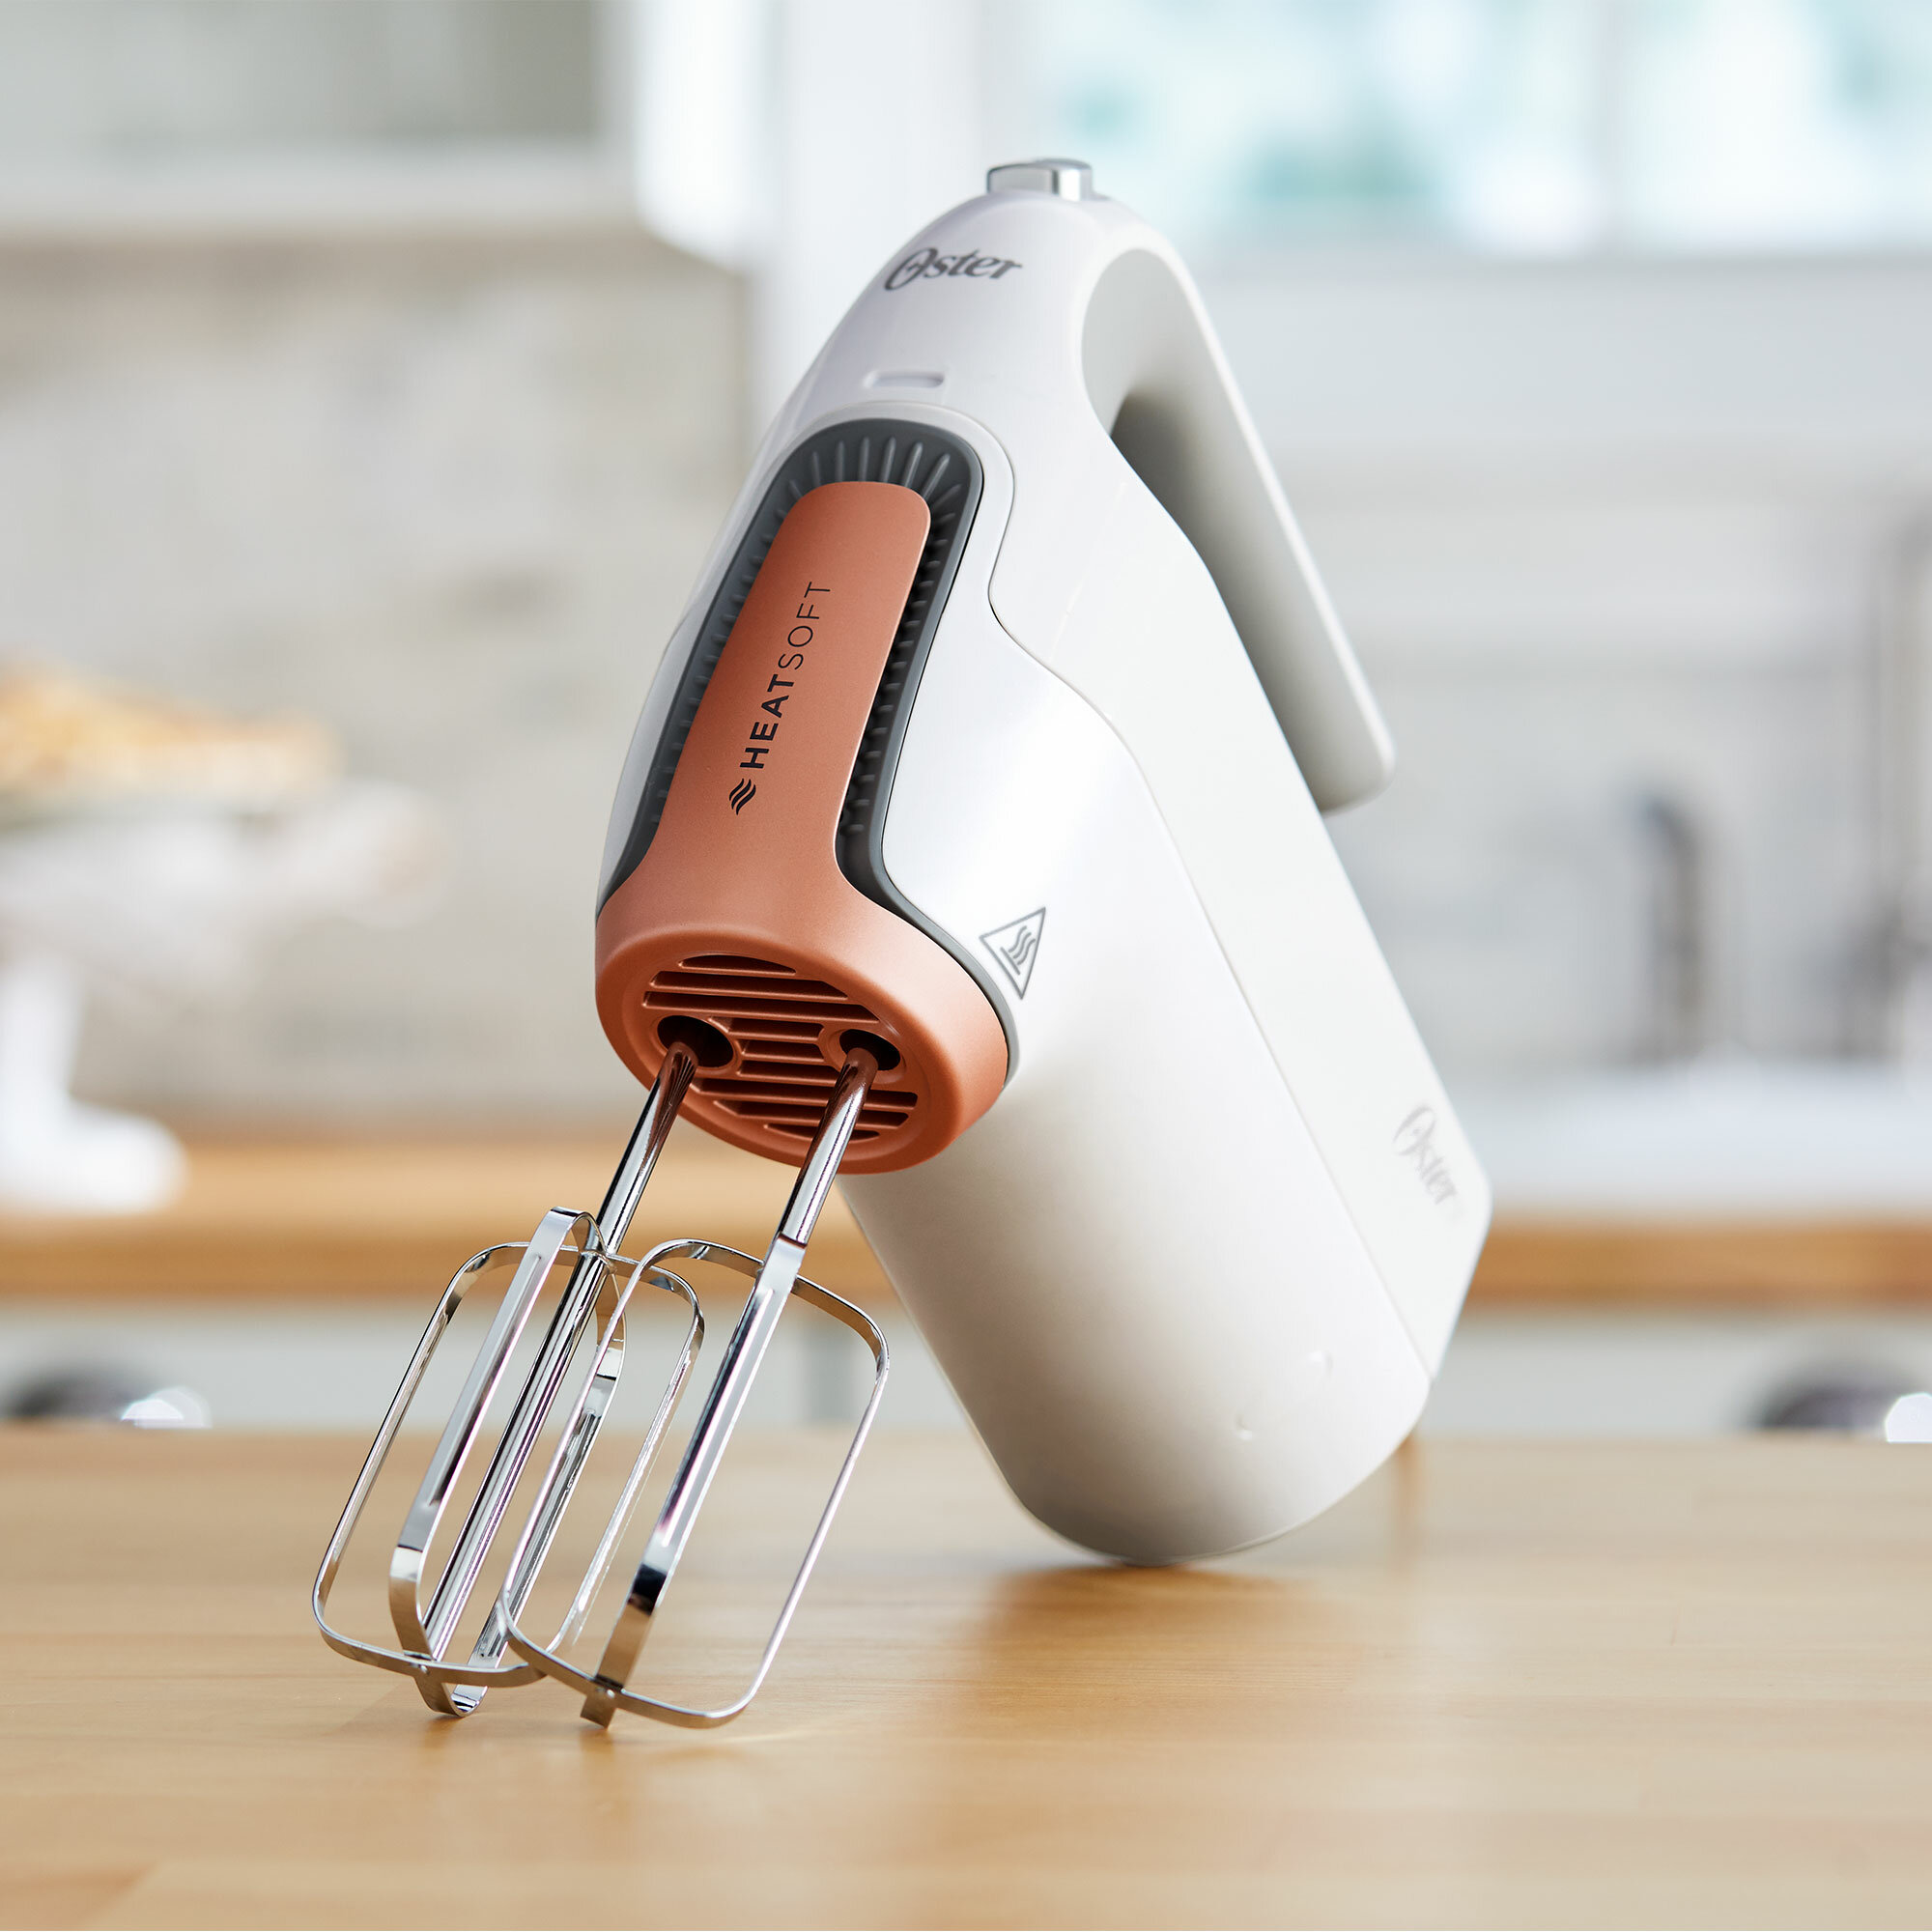 Oster Heat Soft Hand Mixer - Off-White 1 ct